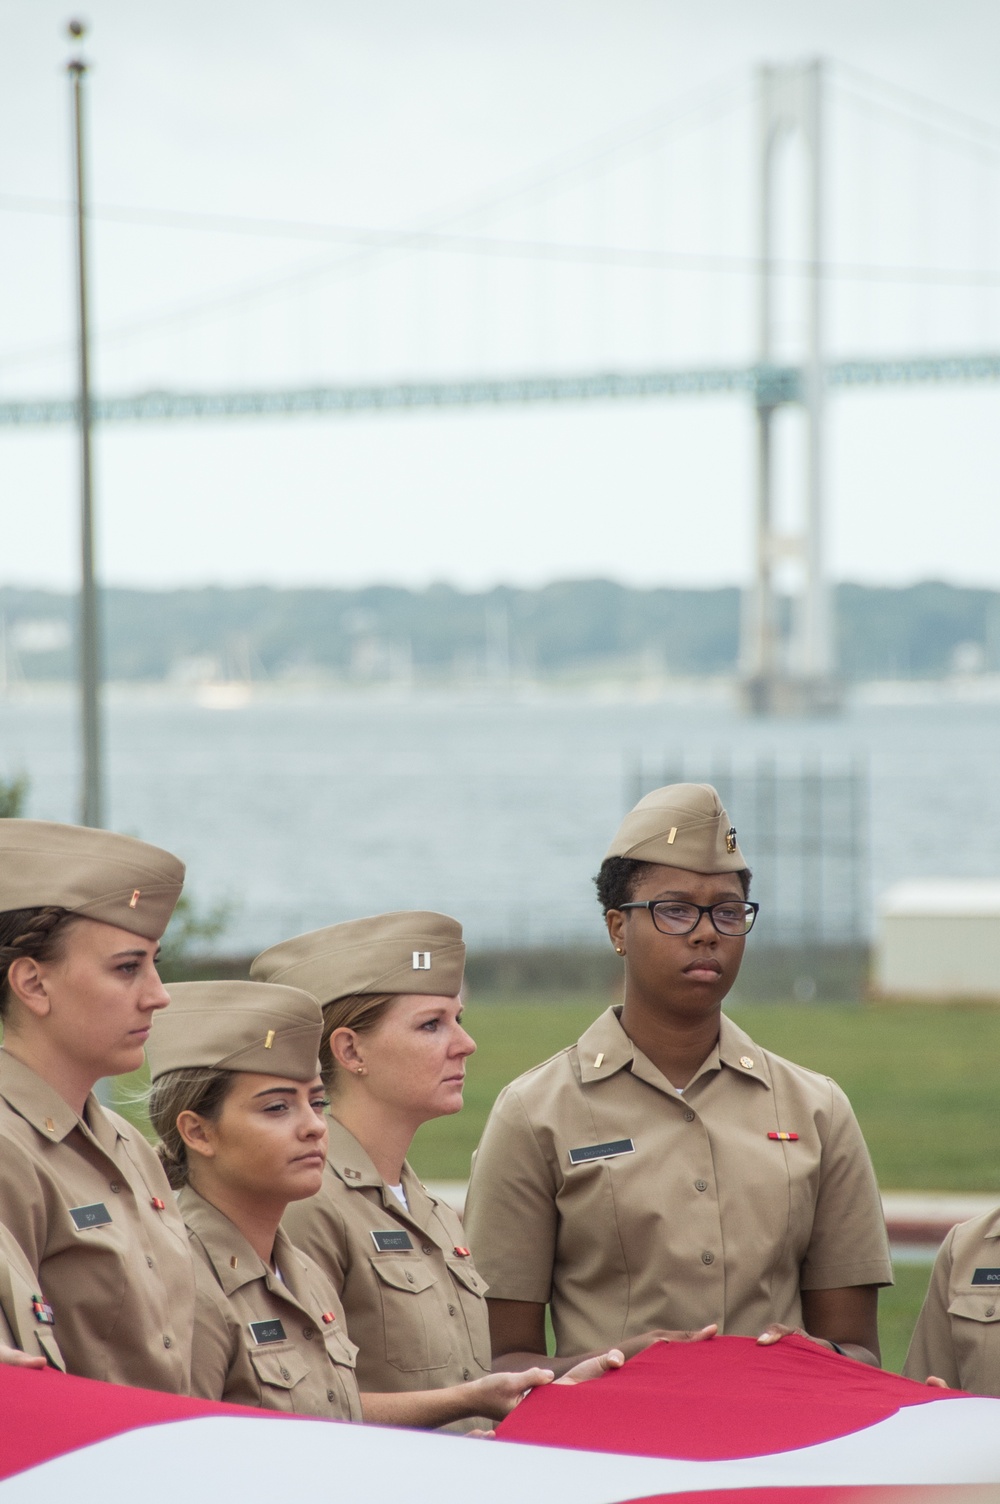 190911-N-TE695-0017 NEWPORT, R.I. (Sept. 11, 2019) — Graduating class 19060 of Officer Development School (ODS) at Officer Training Command, Newport, Rhode Island, conducts a flag ceremony in remembrance of the 9/11 attacks on Sept. 11, 2019.